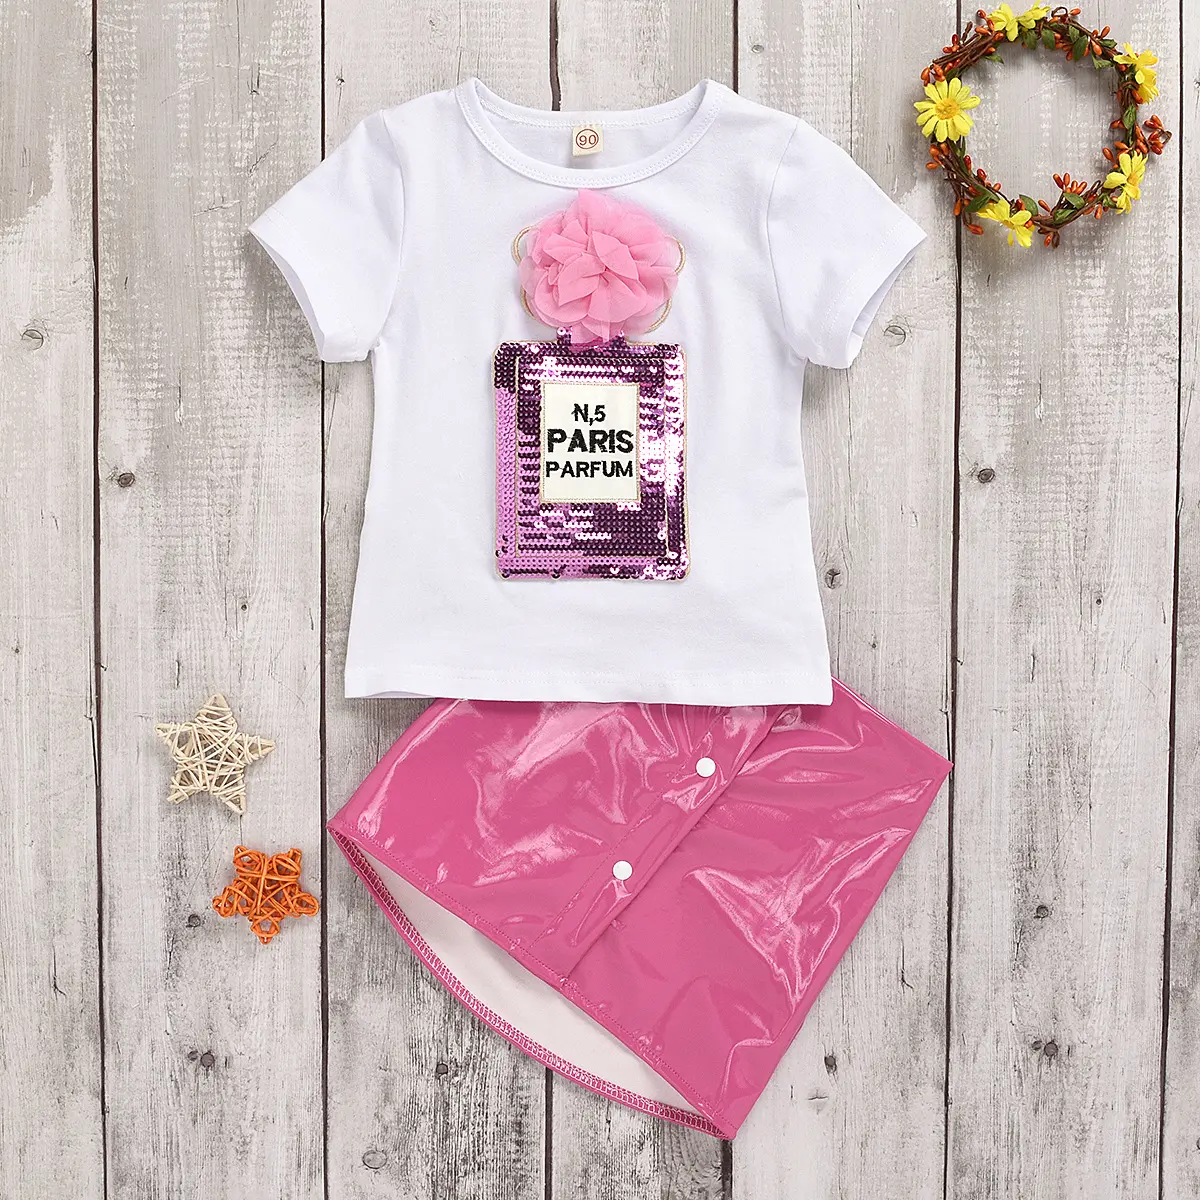 cute kids clothing 2 Pcs Sets wholesale Toddler Kids Baby Girl Clothes Short Sleeve White T-shirt +Mini PU Skirt Outfits Set